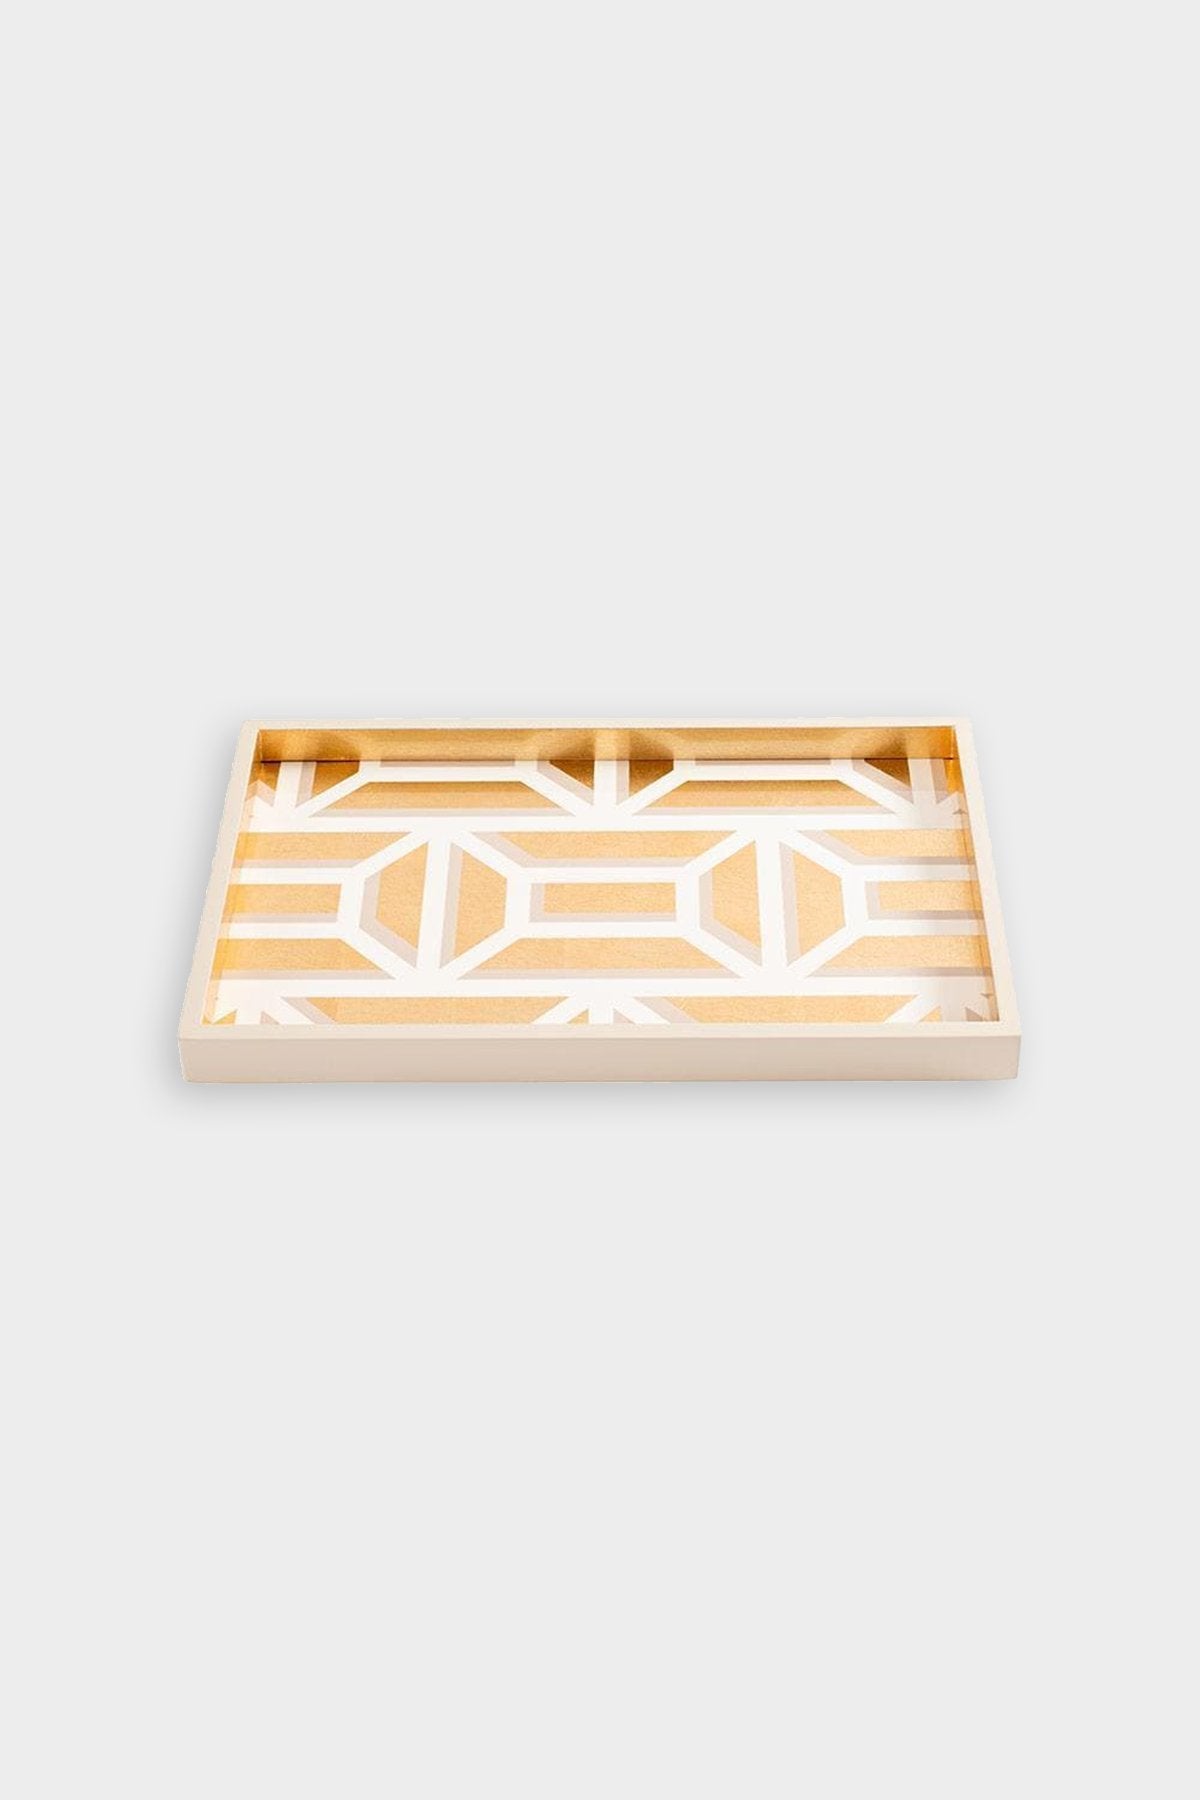 Garden Gate Lacquer Vanity Tray in White & Gold - shop-olivia.com